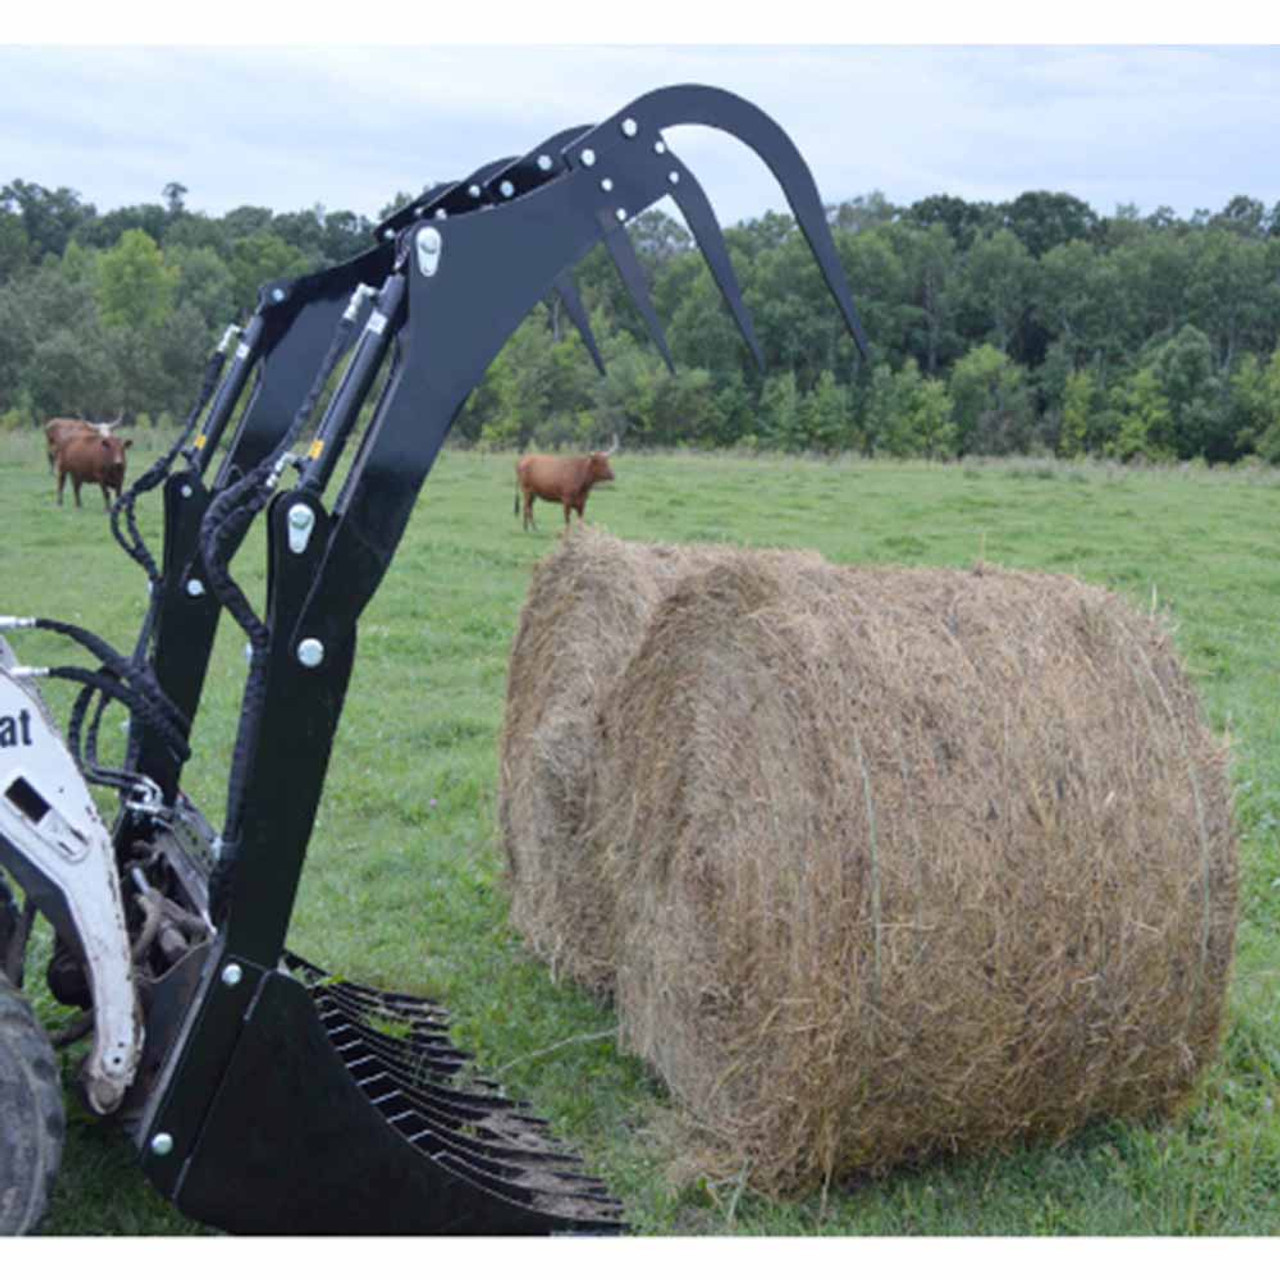 Top Dog Attachments Skid Steer Bale Grapple